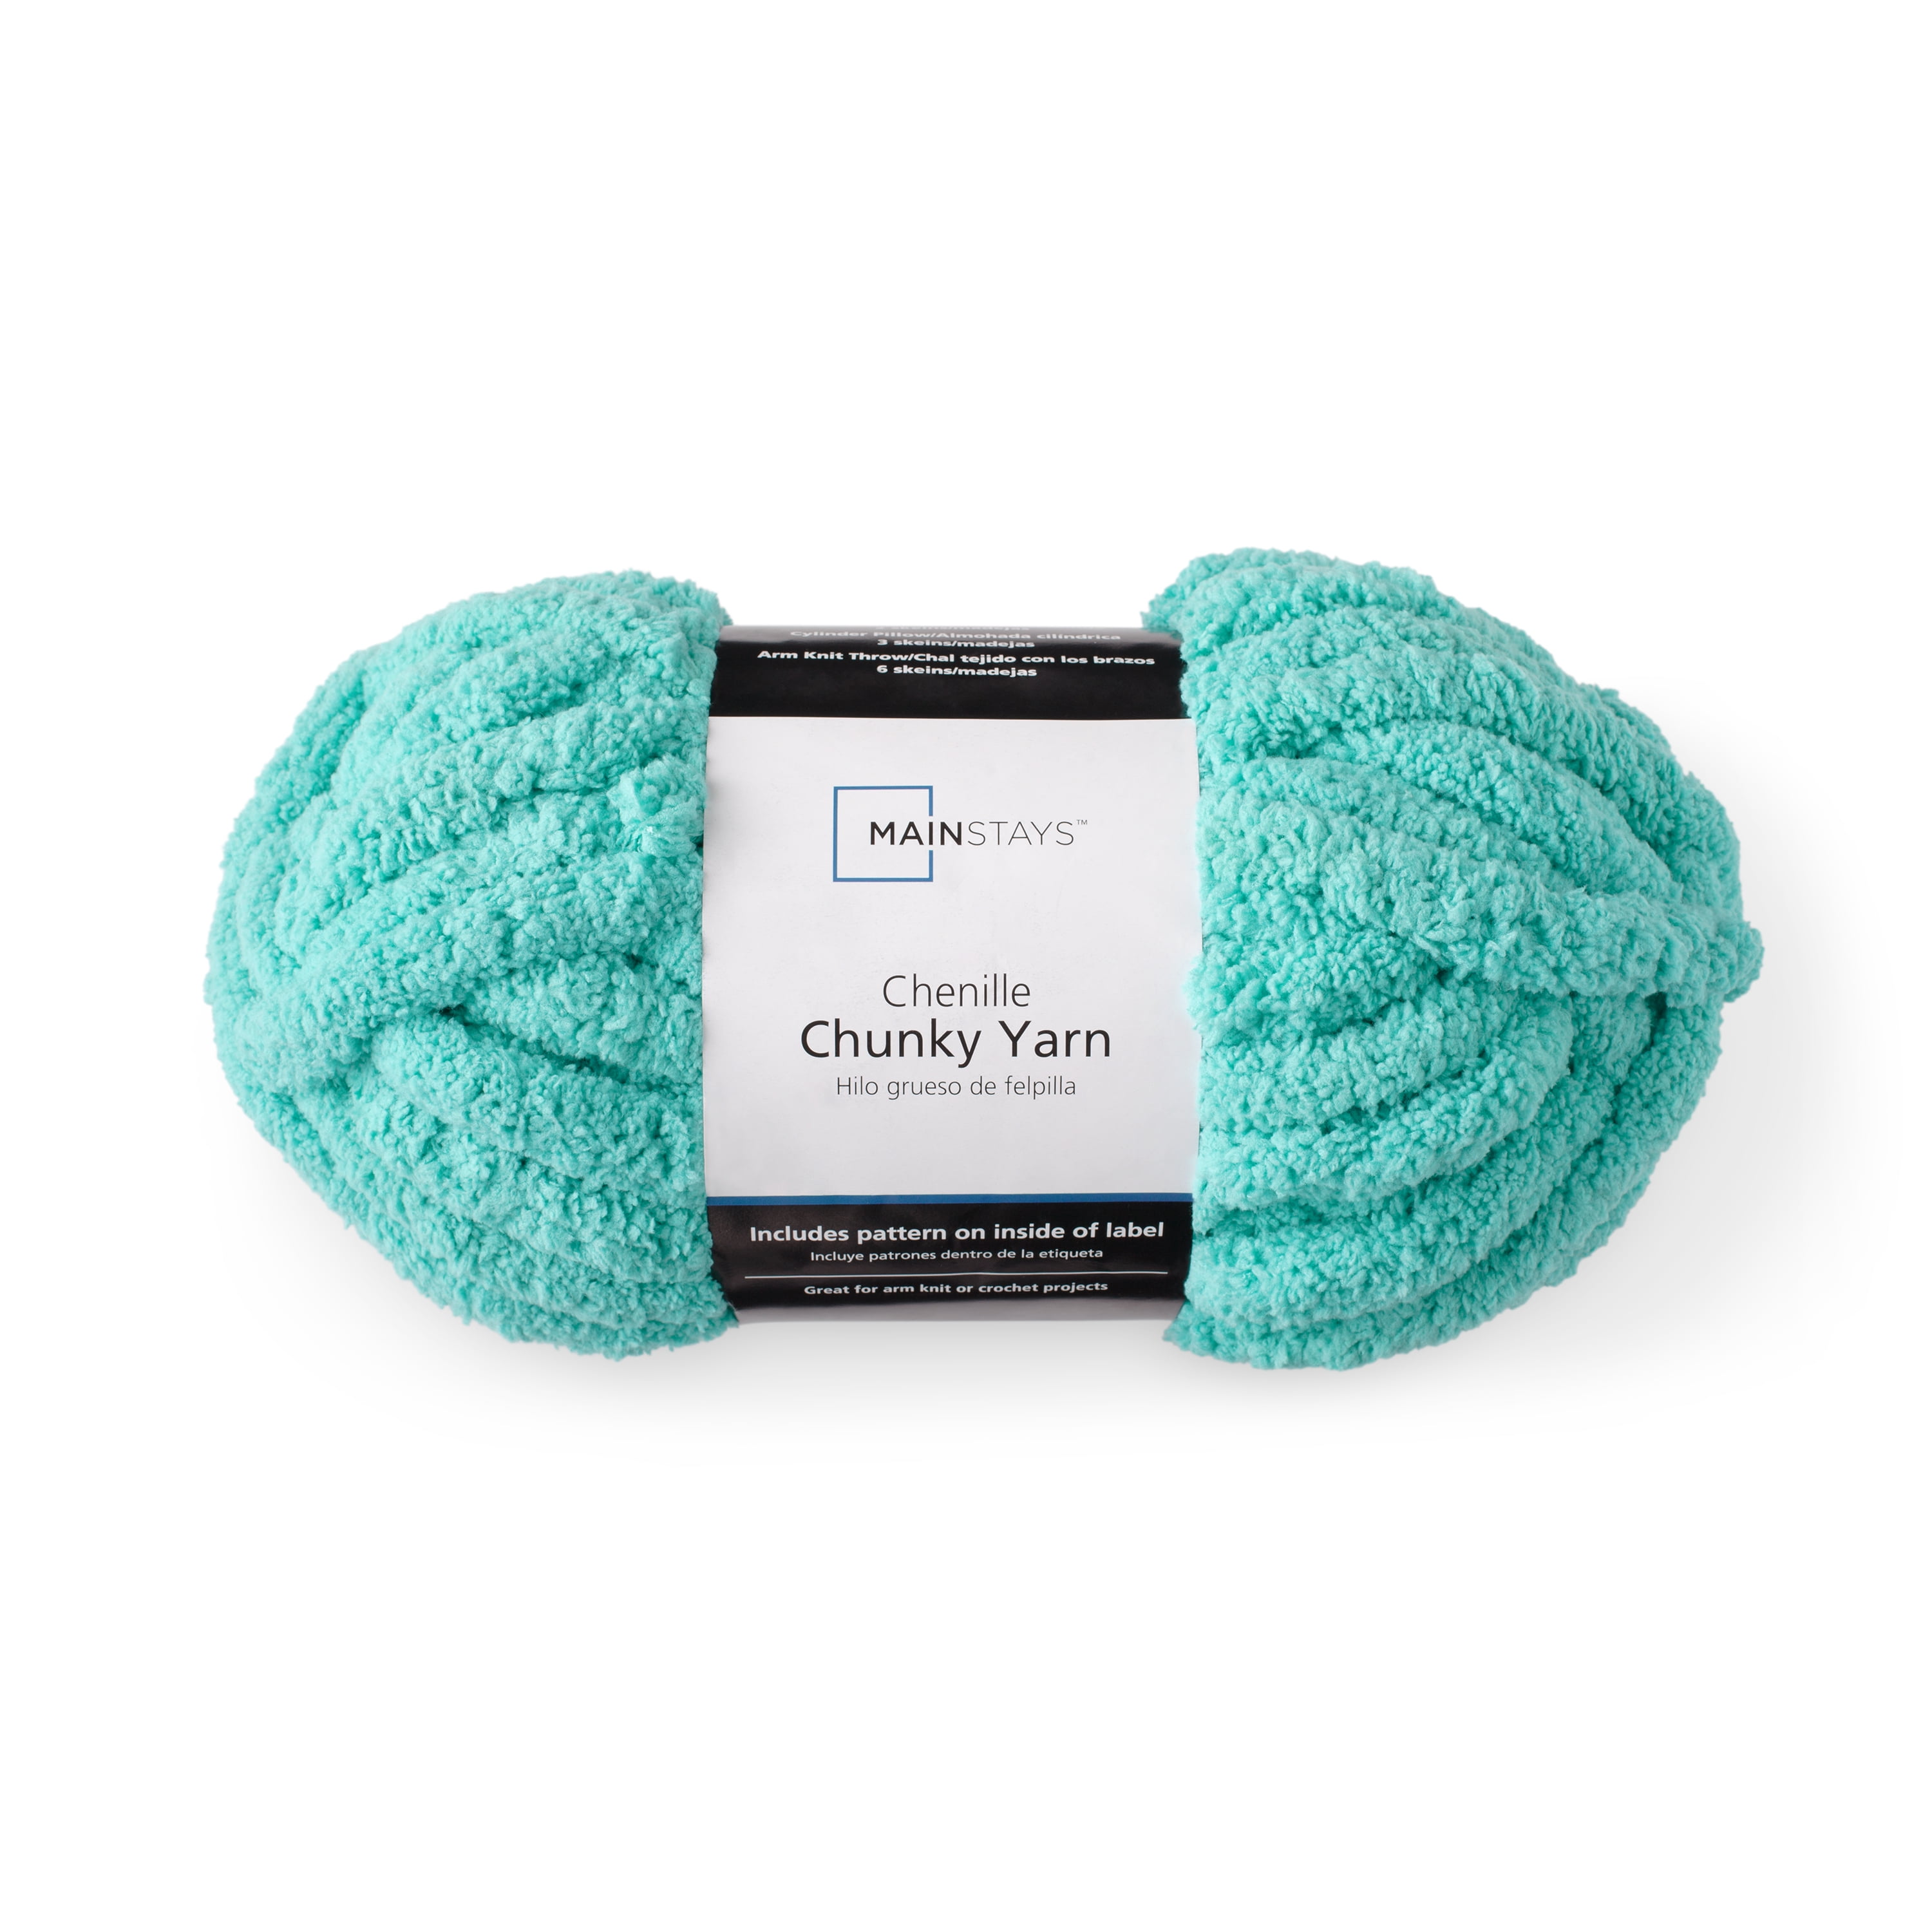 washable yarn Blue super Chunky Yarn Turquoise Super Chunky Yarn 100g balls of yarn 100% acrylic chunky knitting suitable for vegans